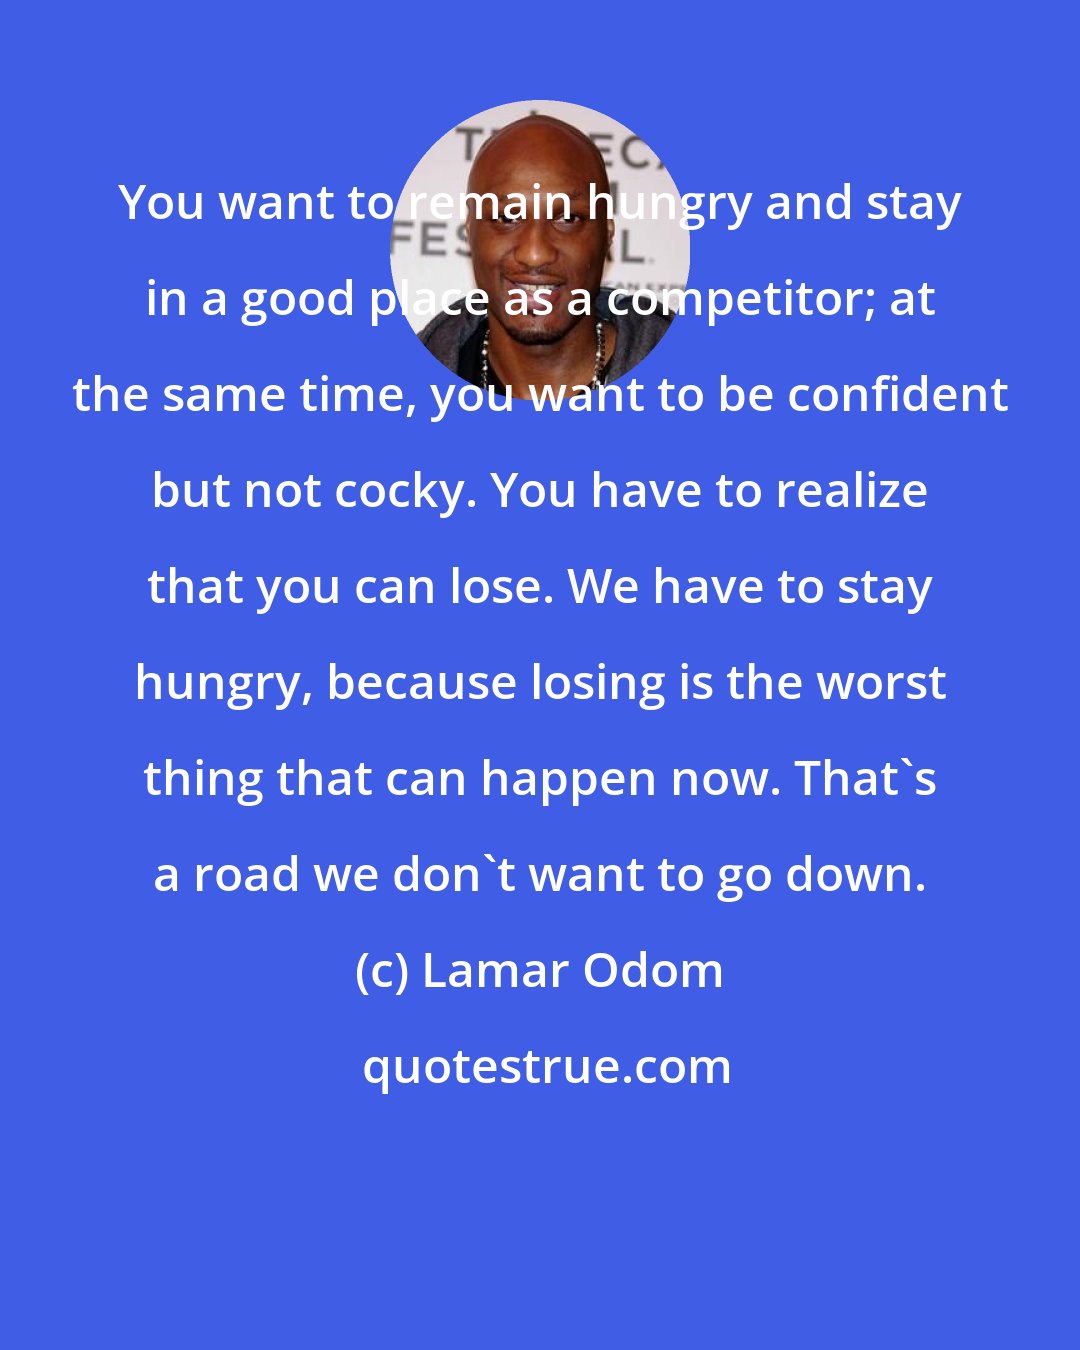 Lamar Odom: You want to remain hungry and stay in a good place as a competitor; at the same time, you want to be confident but not cocky. You have to realize that you can lose. We have to stay hungry, because losing is the worst thing that can happen now. That's a road we don't want to go down.